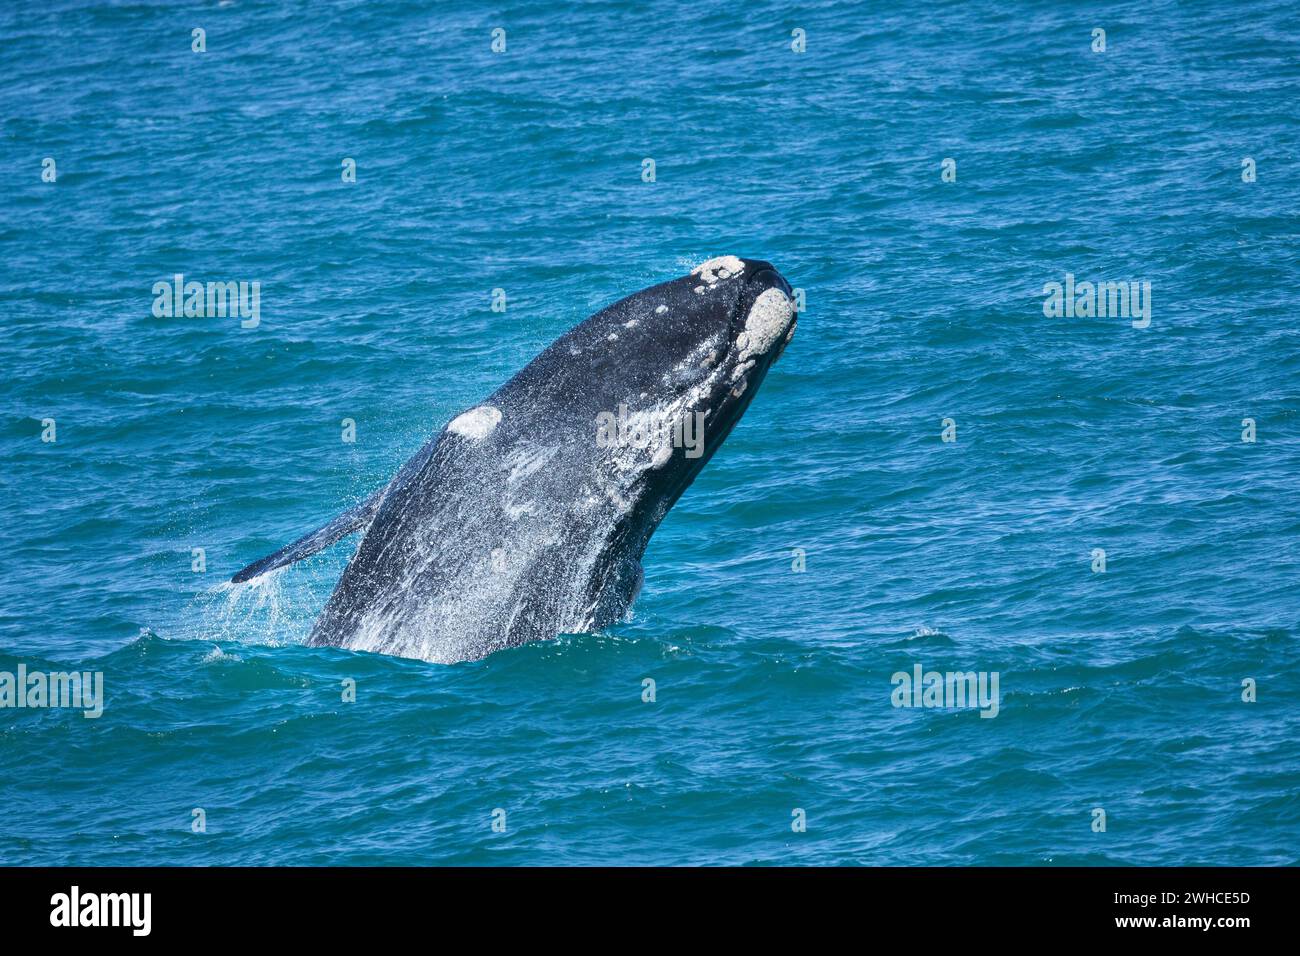 South Africa, Western Cape Province, Overstrand, Southern Right Whale, Eubalaena australis, Ocean, power in nature, breathing Stock Photo